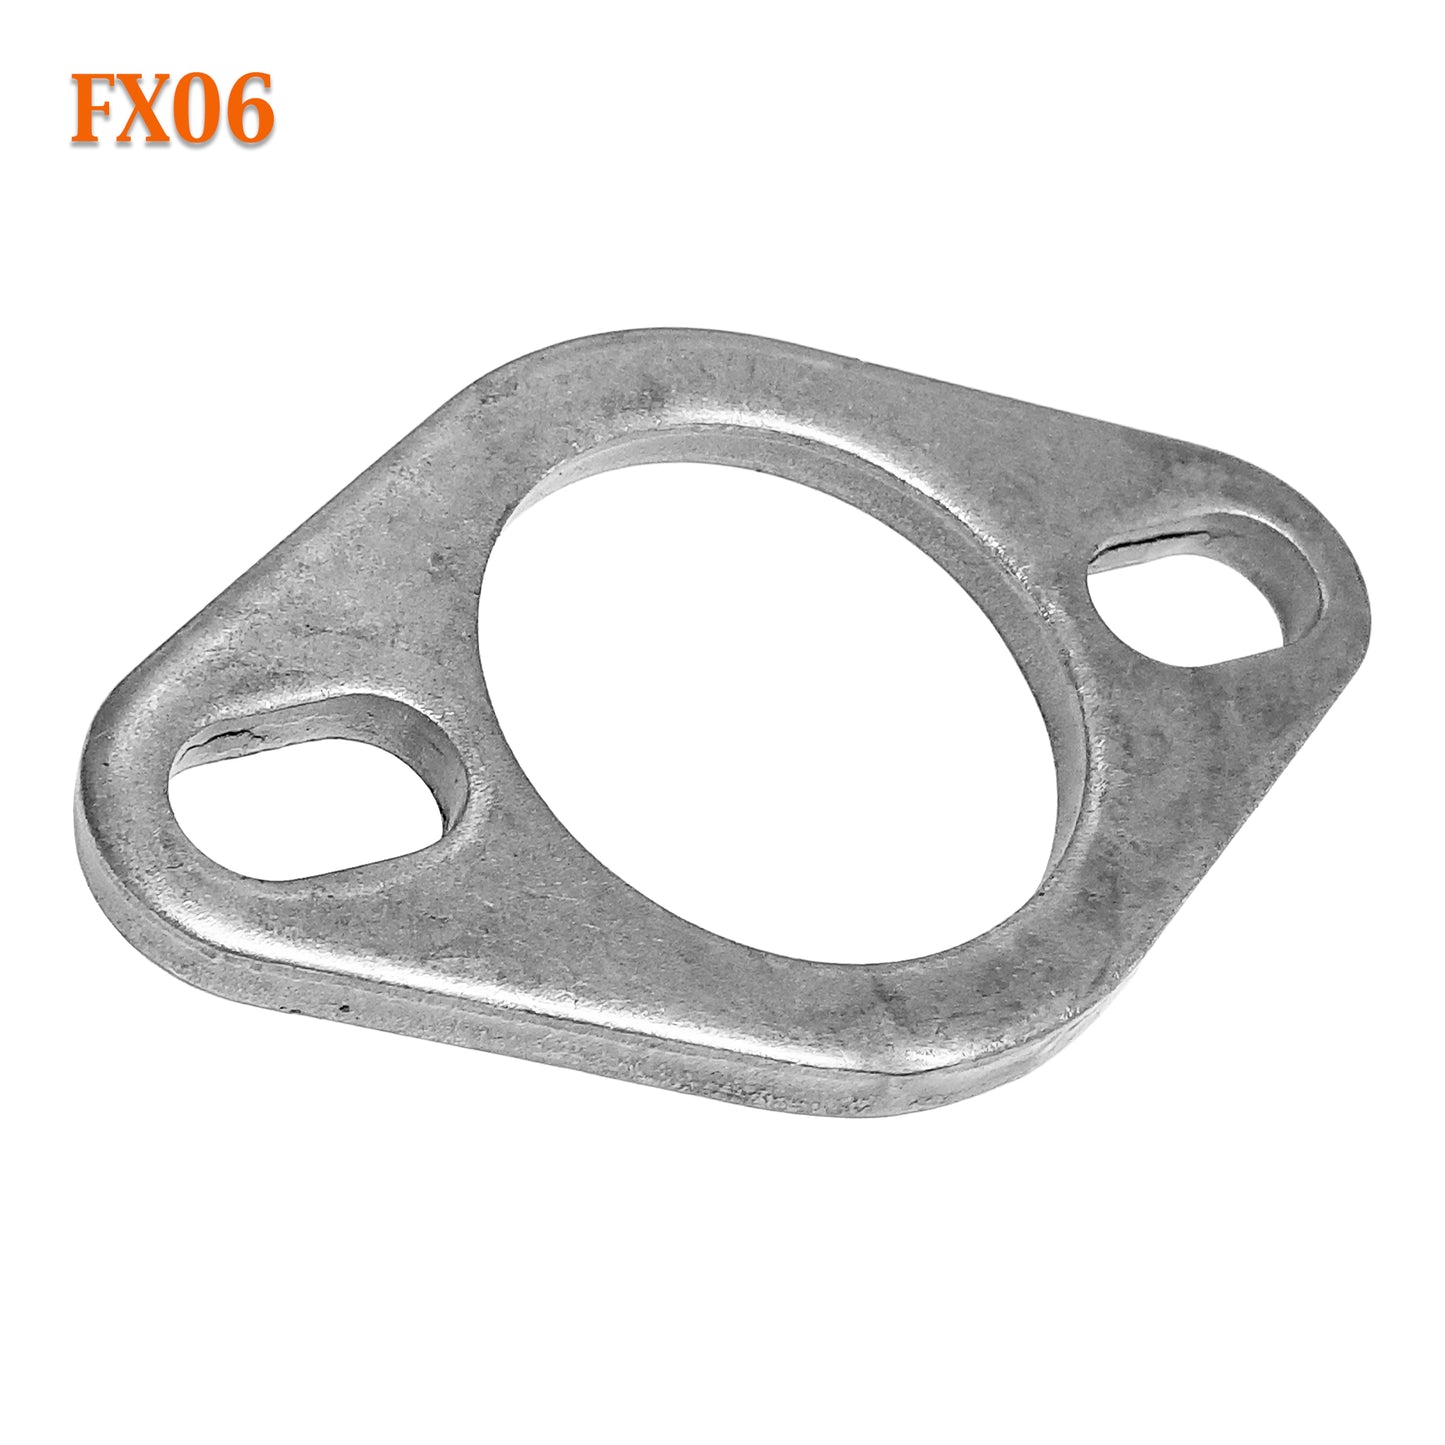 FX06 2 1/8" ID Flat Oval Two Bolt Exhaust Flange Fits 2" - 2 1/8" 2.125" Pipe